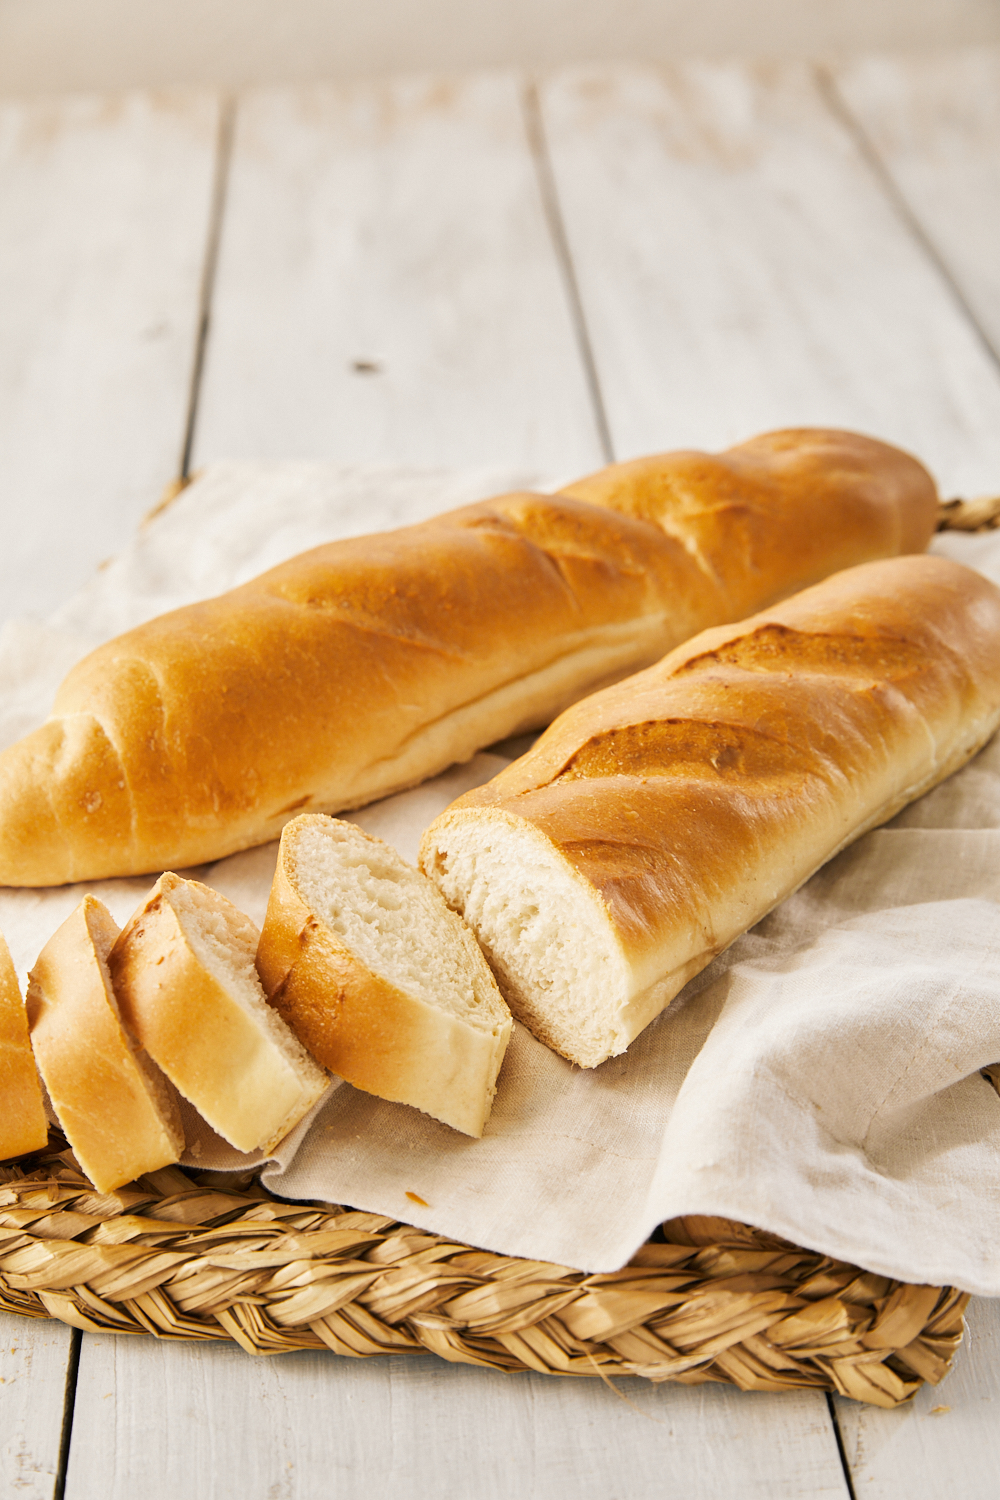 FRENCH BREAD/BAGUETTE